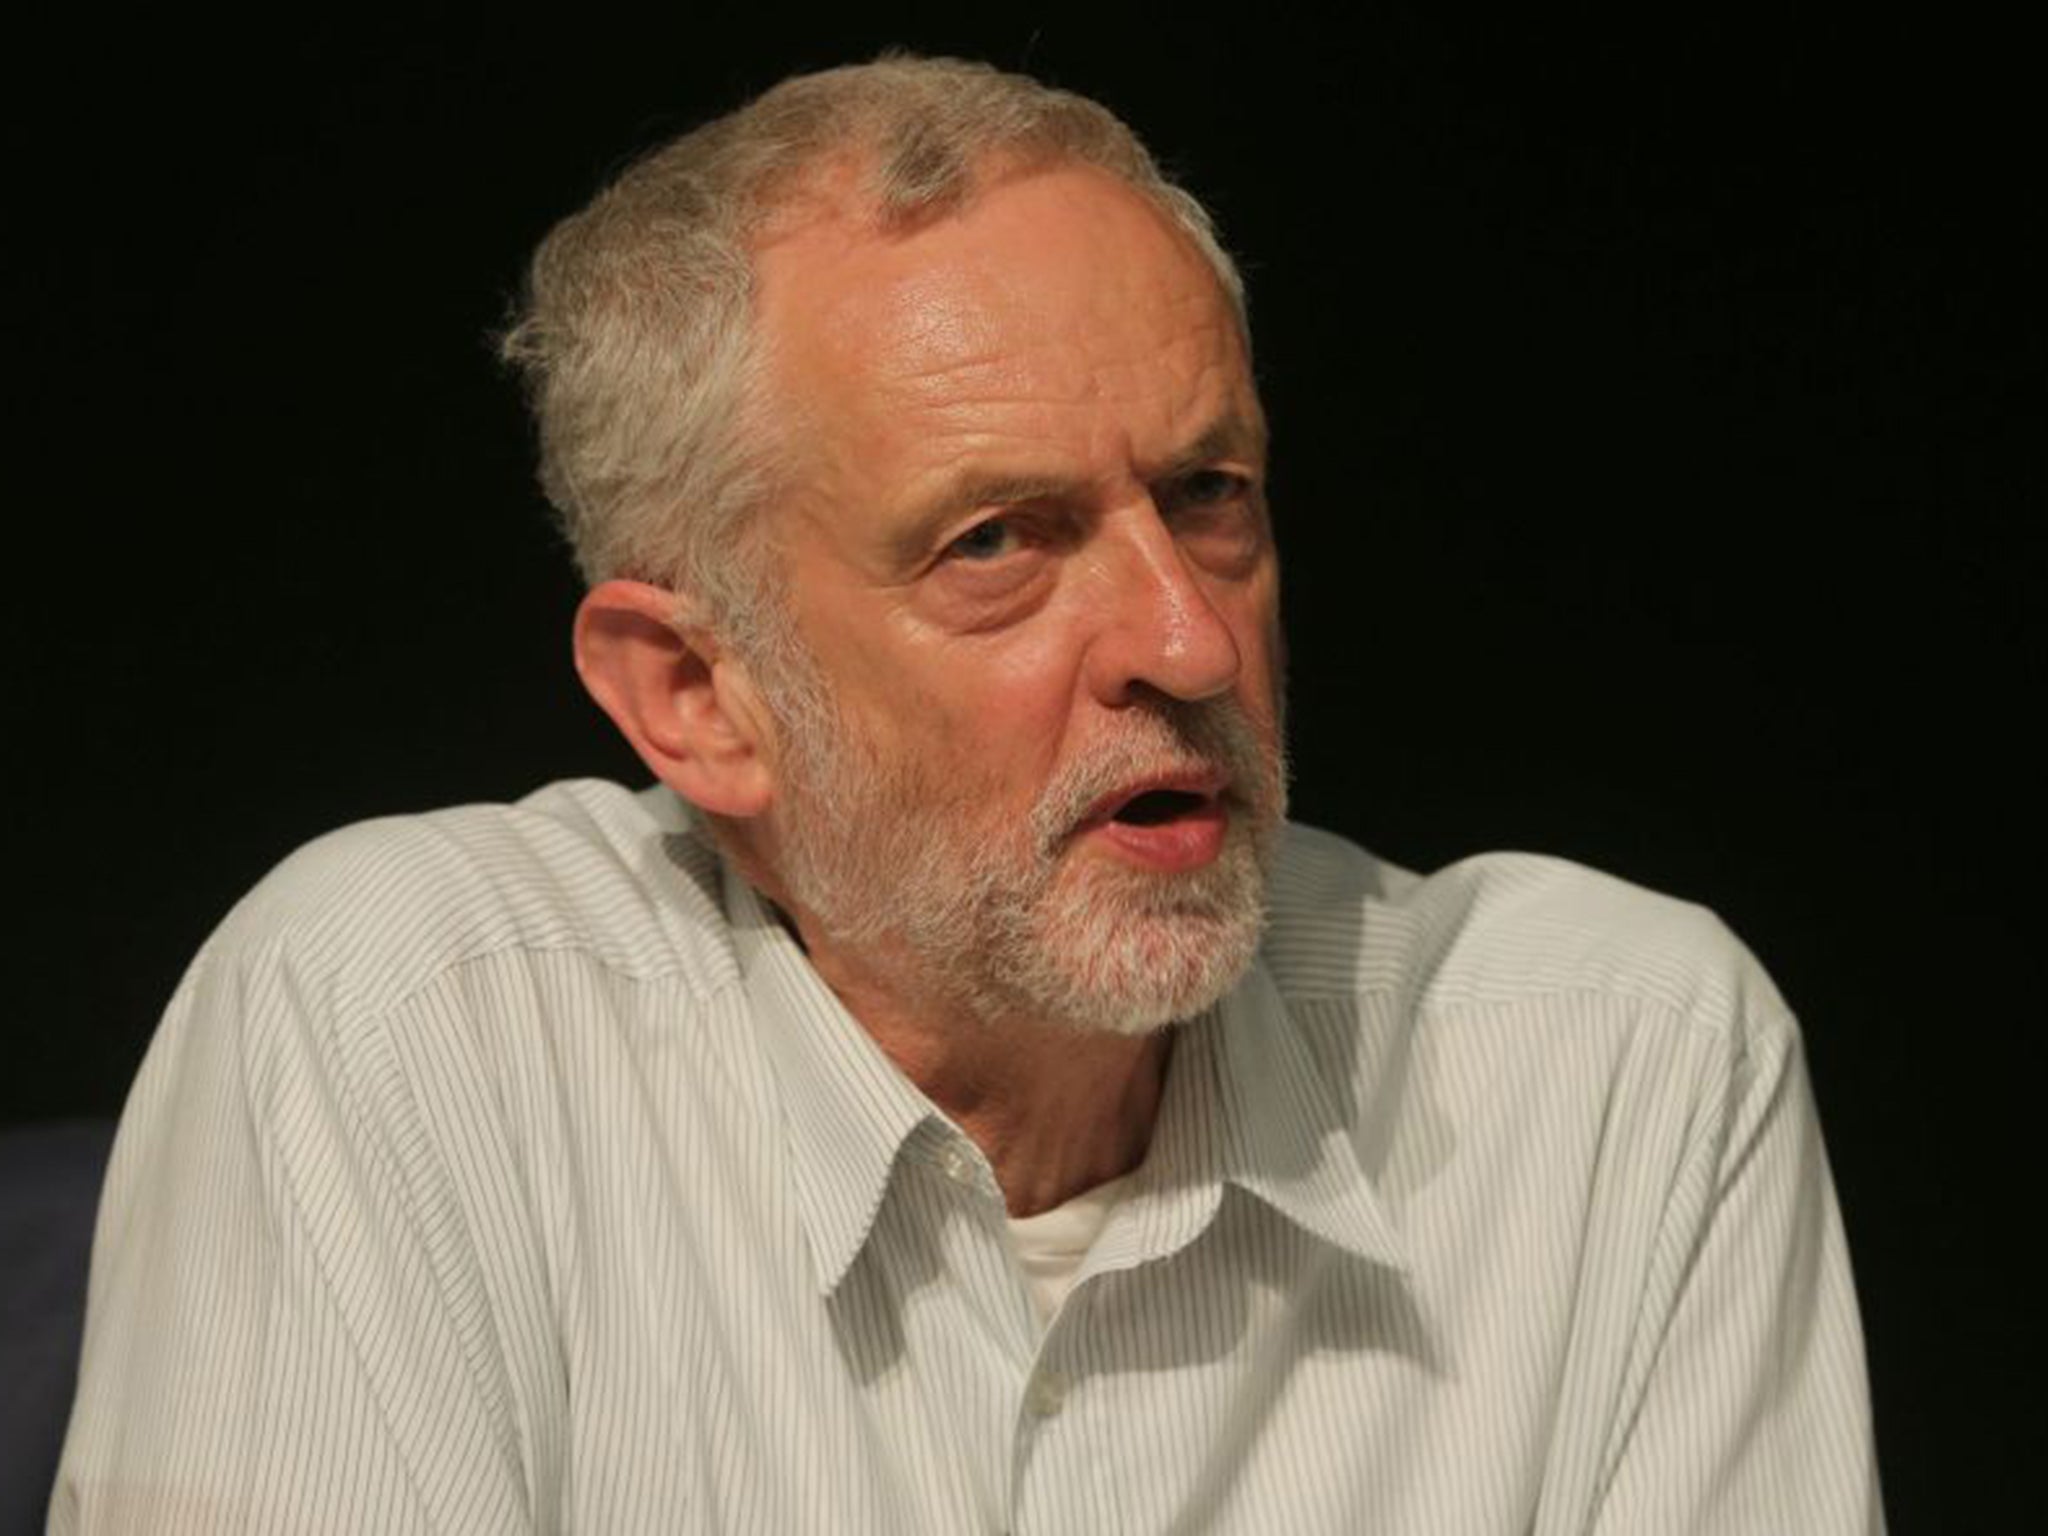 Mr Corbyn has called for an 'anti-austerity movement' in the UK